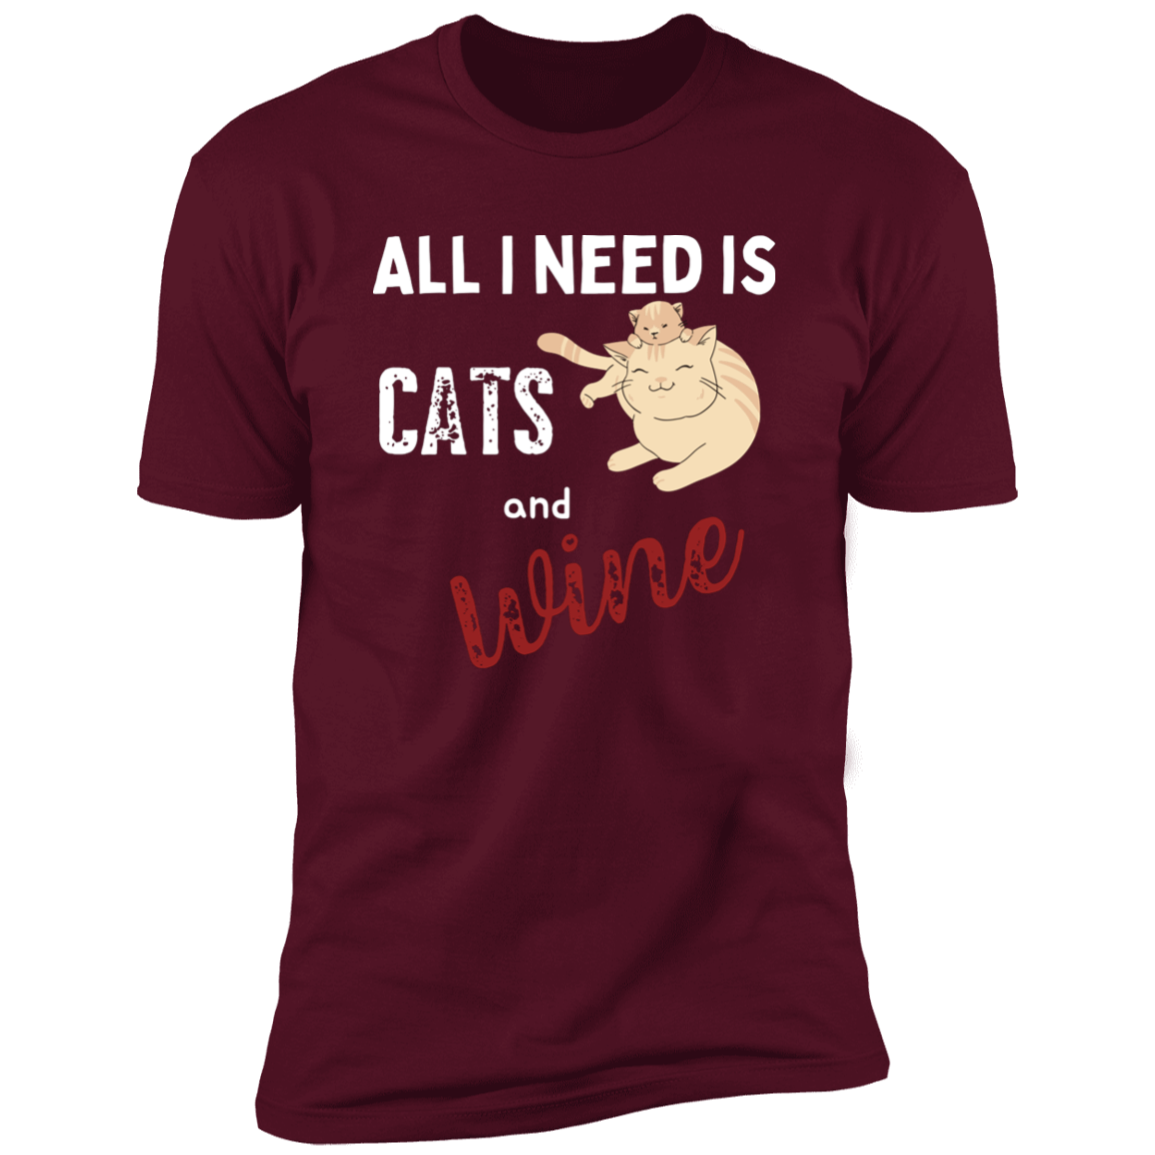 All I Need is Cats and Wine, Cat shirt for humas, in maroon